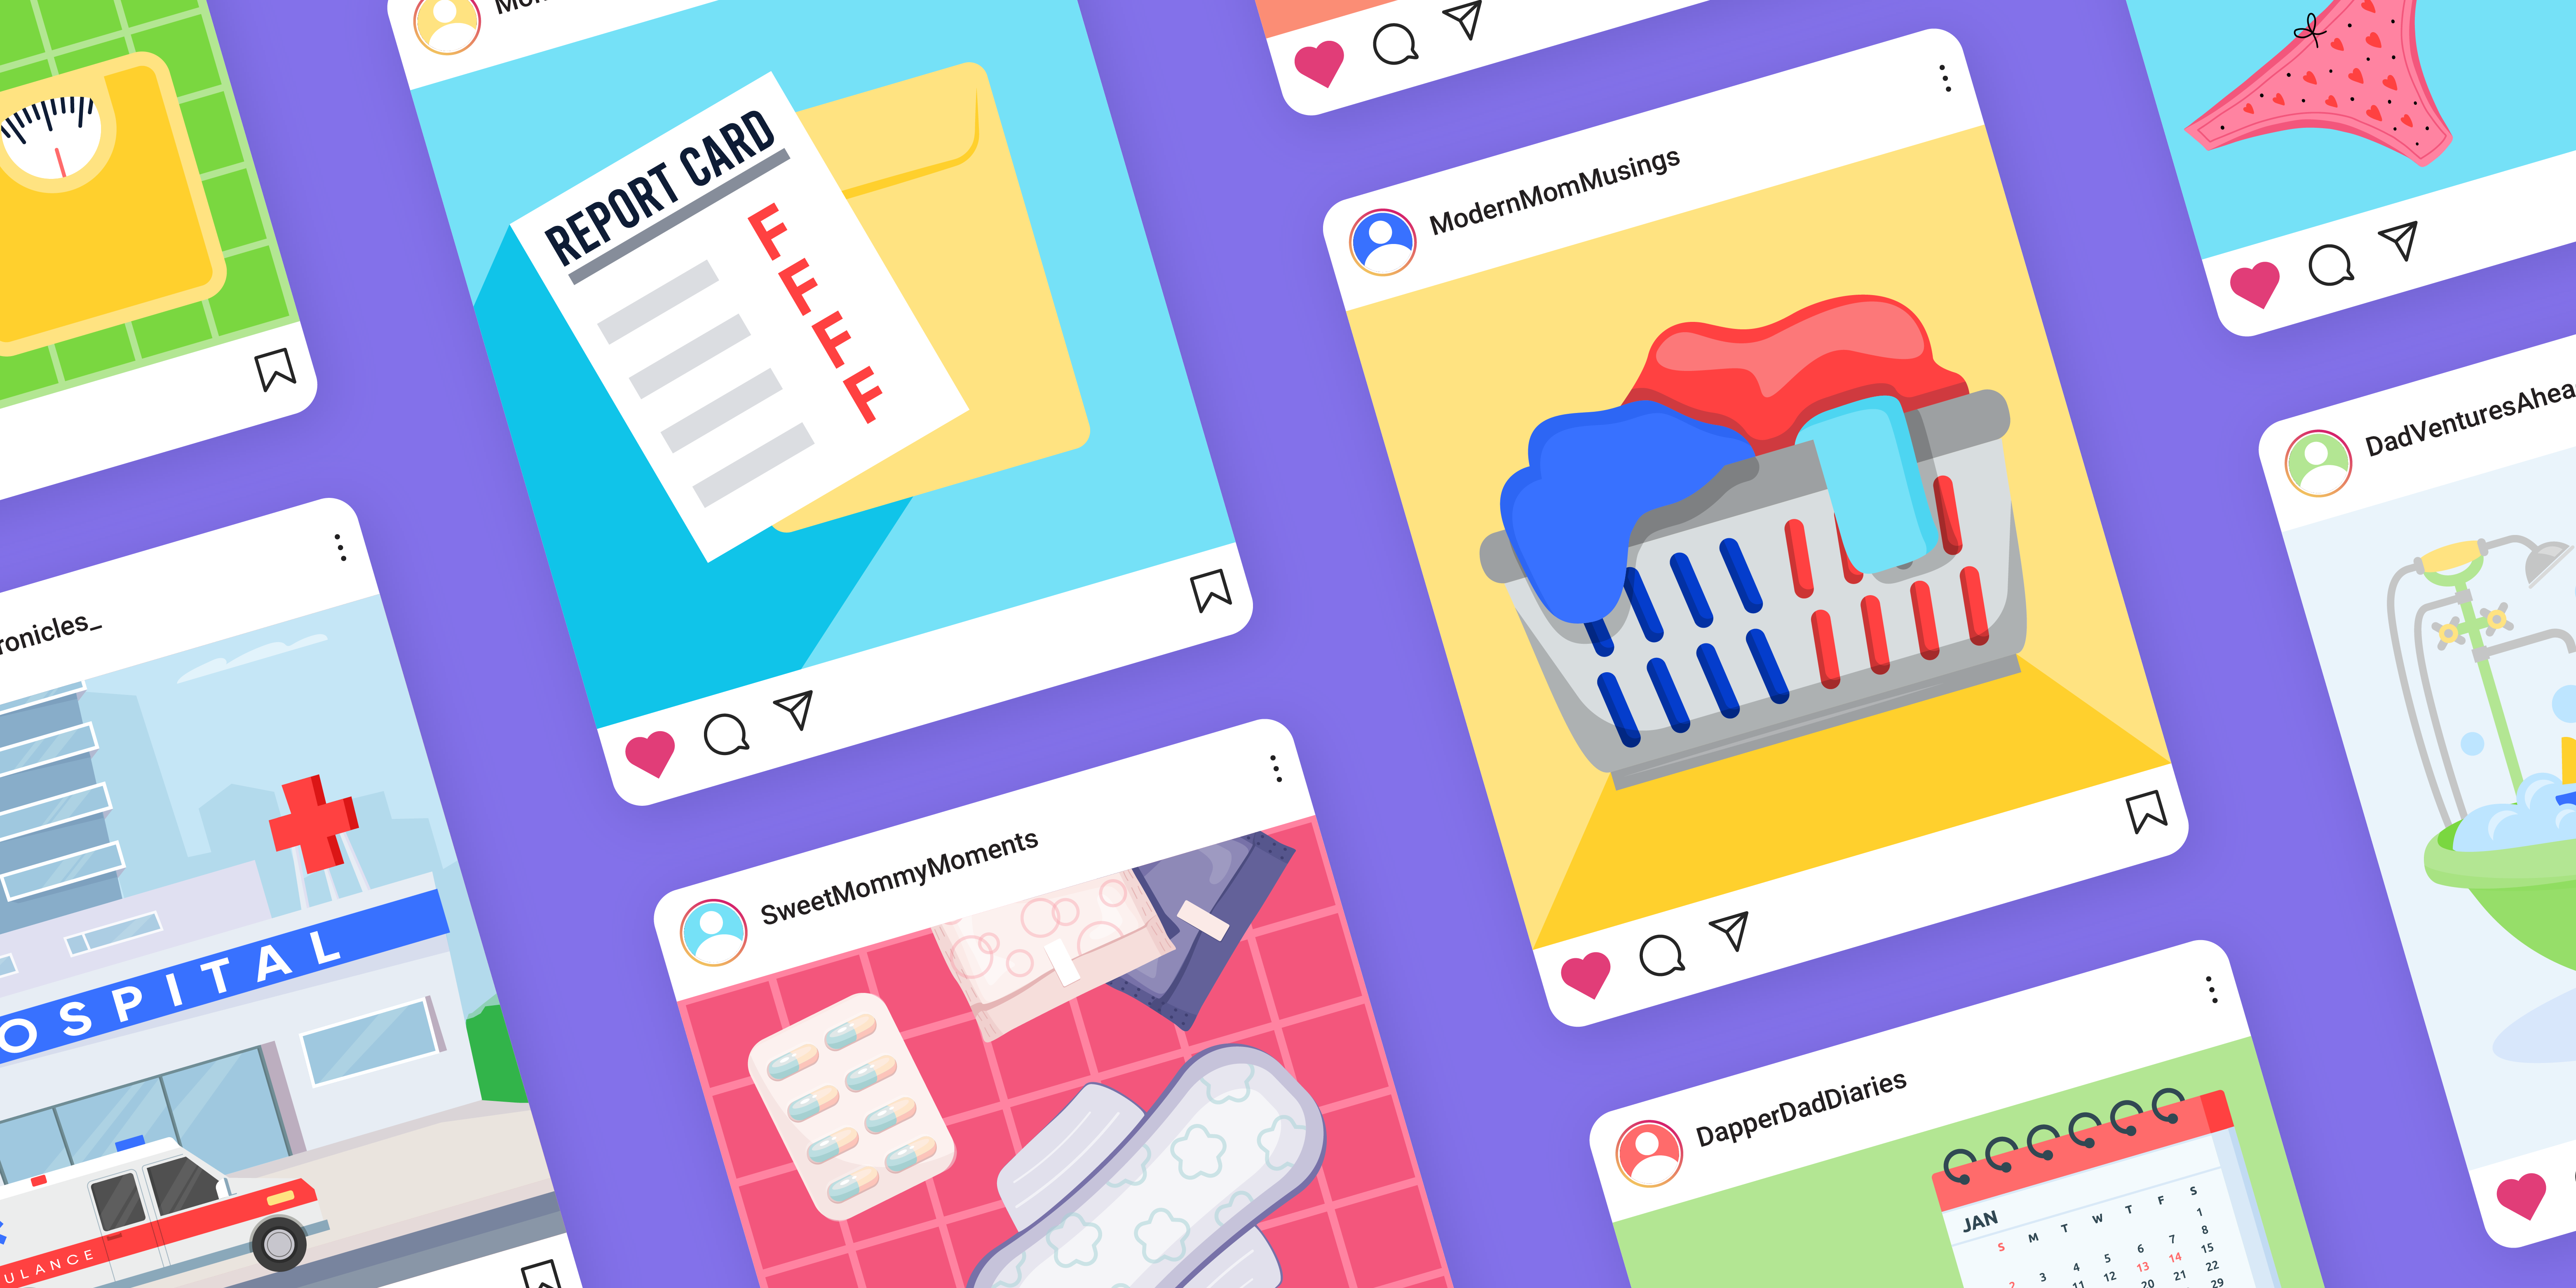 Brightly colored social media posts from parent influencers show that they've shared report cards, women's hygiene products, and other sensitive information online